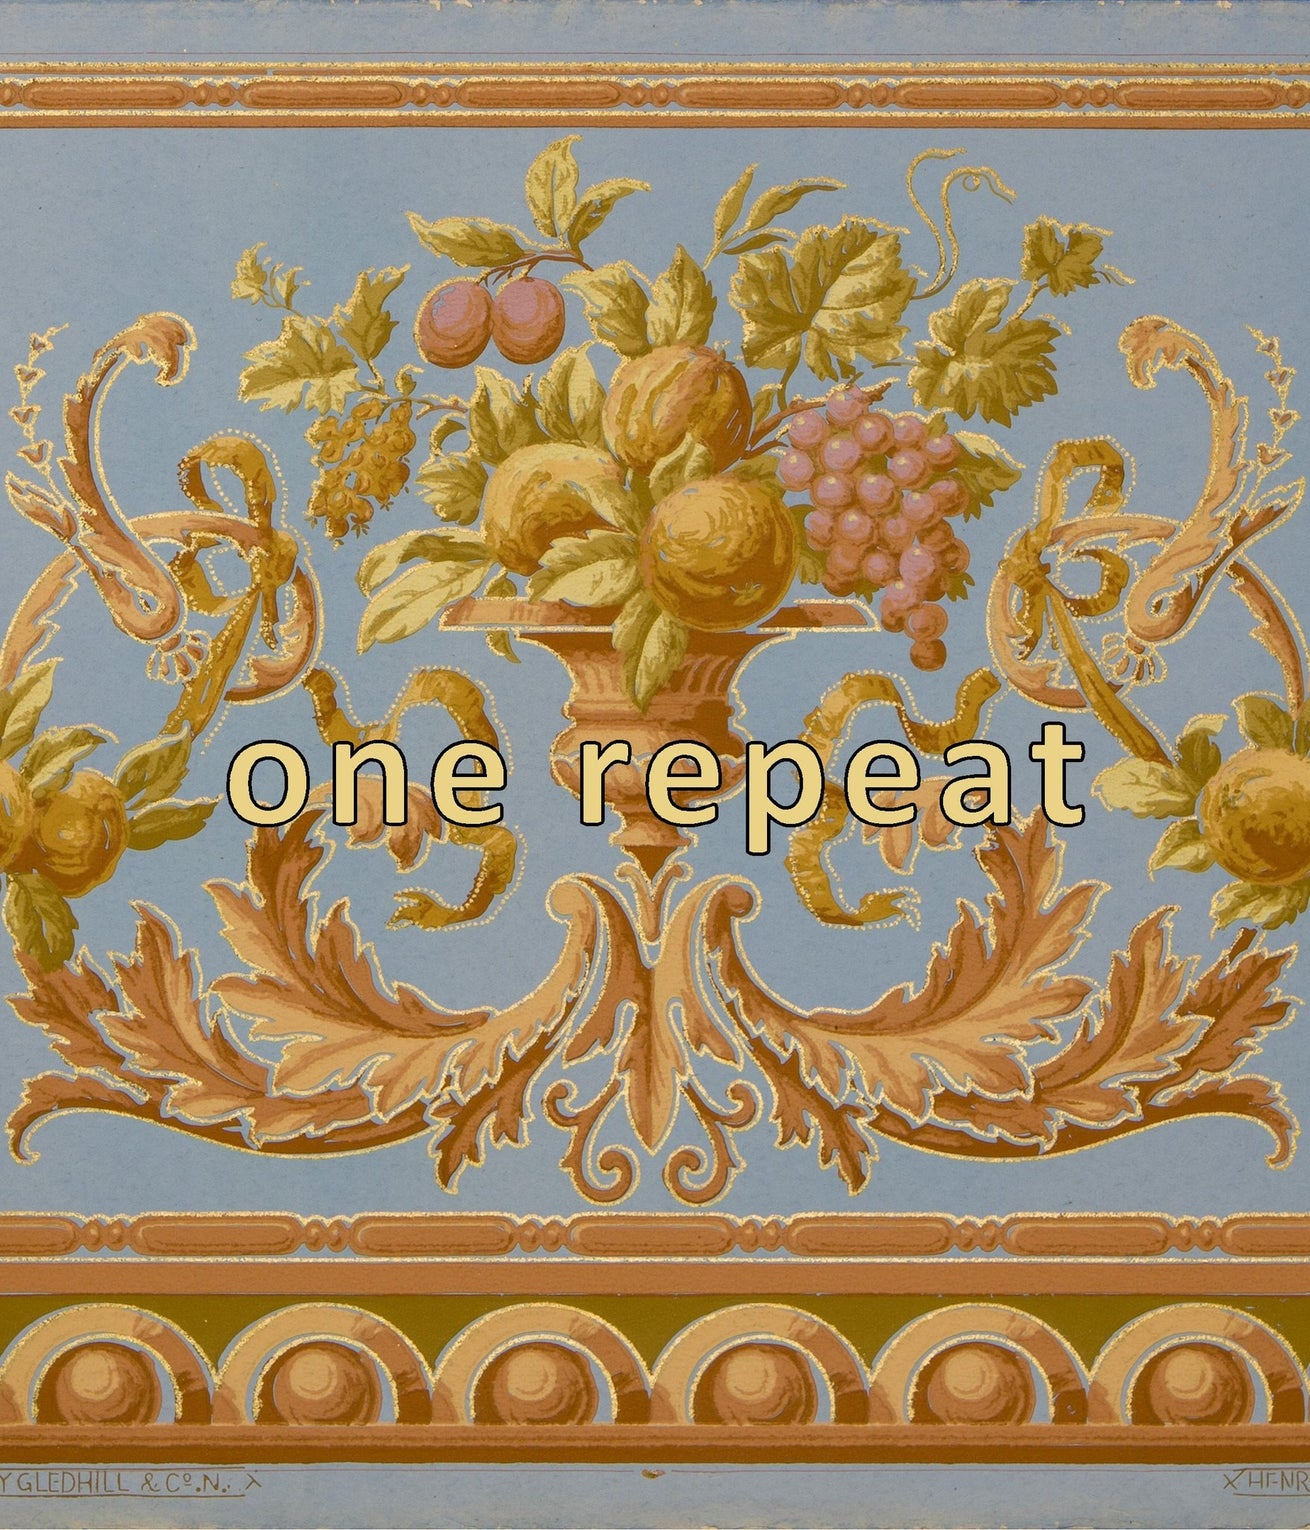 Classical Frieze with Urns, Fruit, Ribbons - Antique Wallpaper Remnant